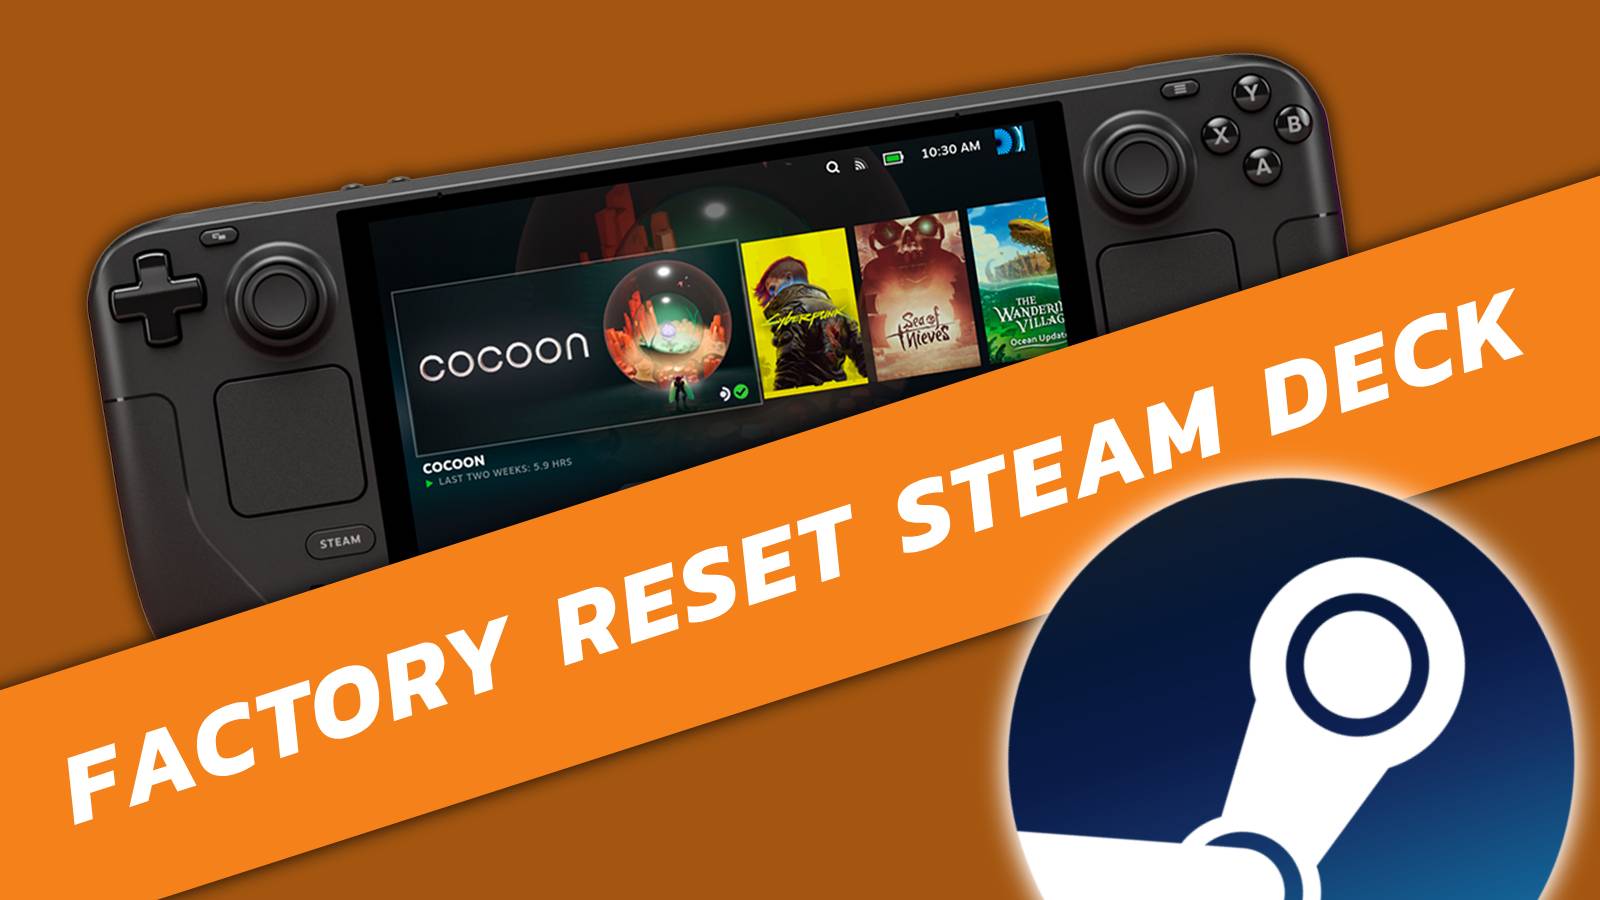 An image of the Steam Deck with an orange banner across it, and the Steam logo in the bottom right corner.